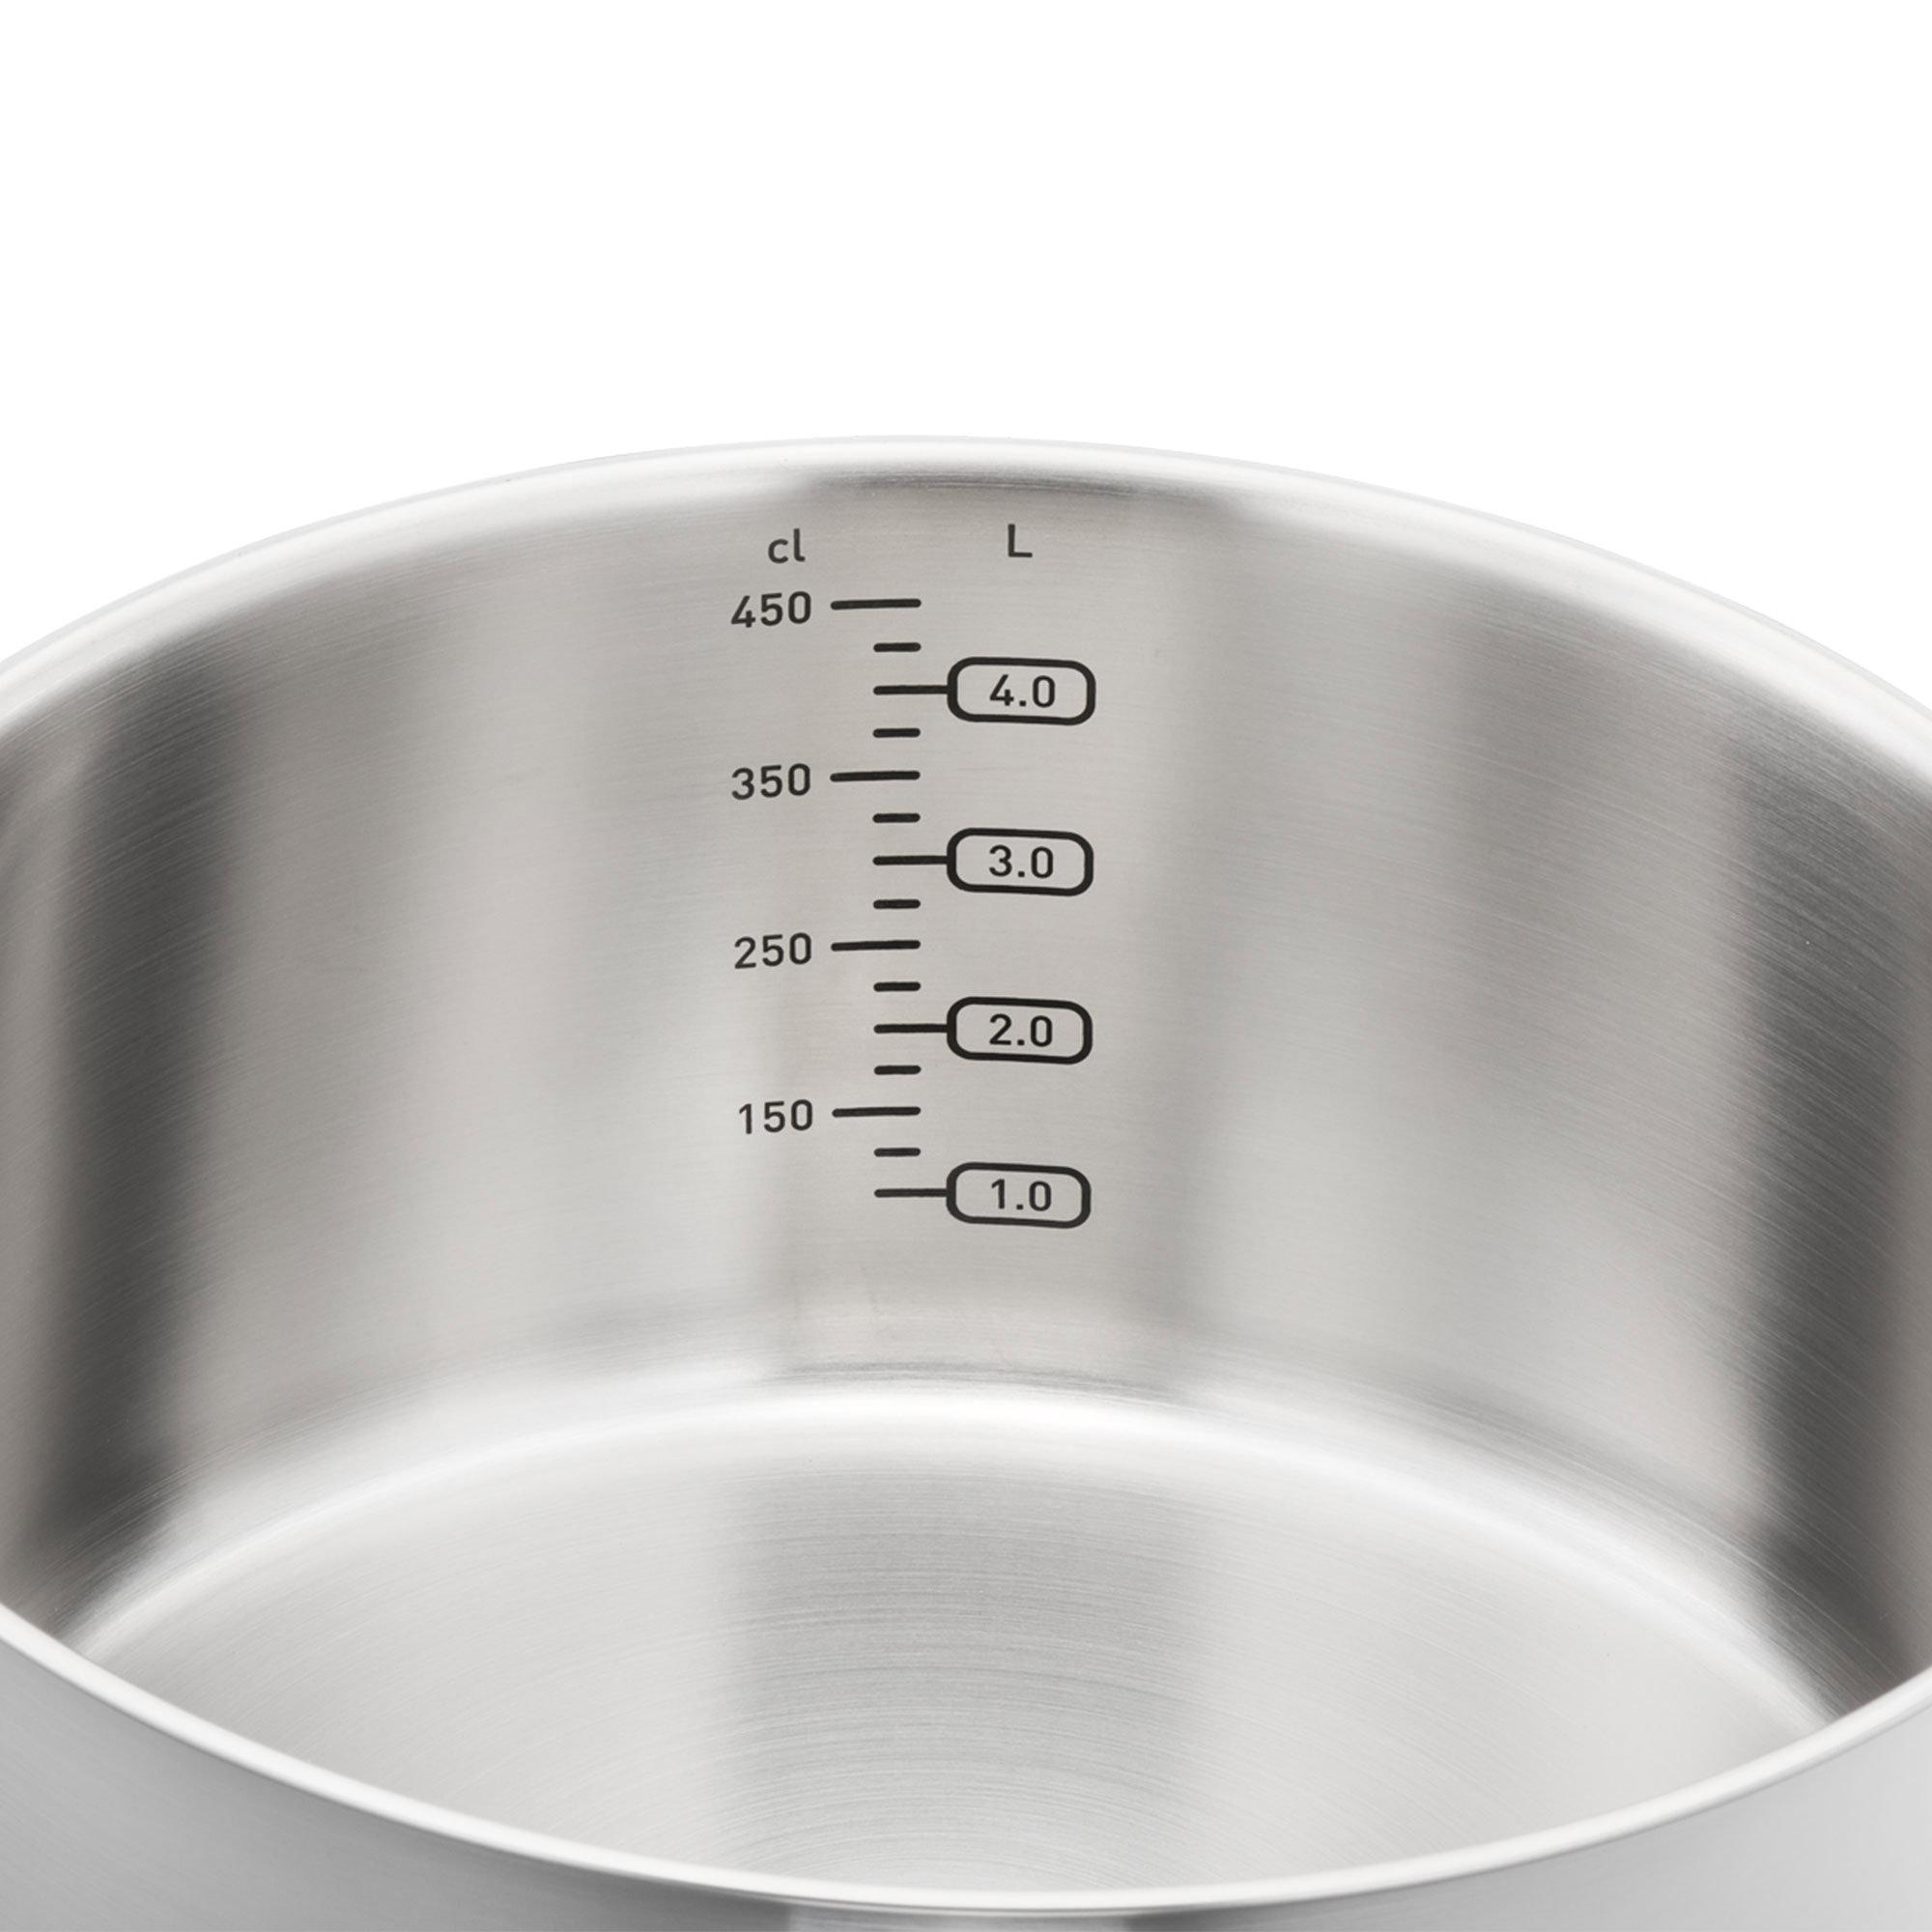 Tefal Virtuoso Stainless Steel Stewpot 24cm - 5.4L Image 3